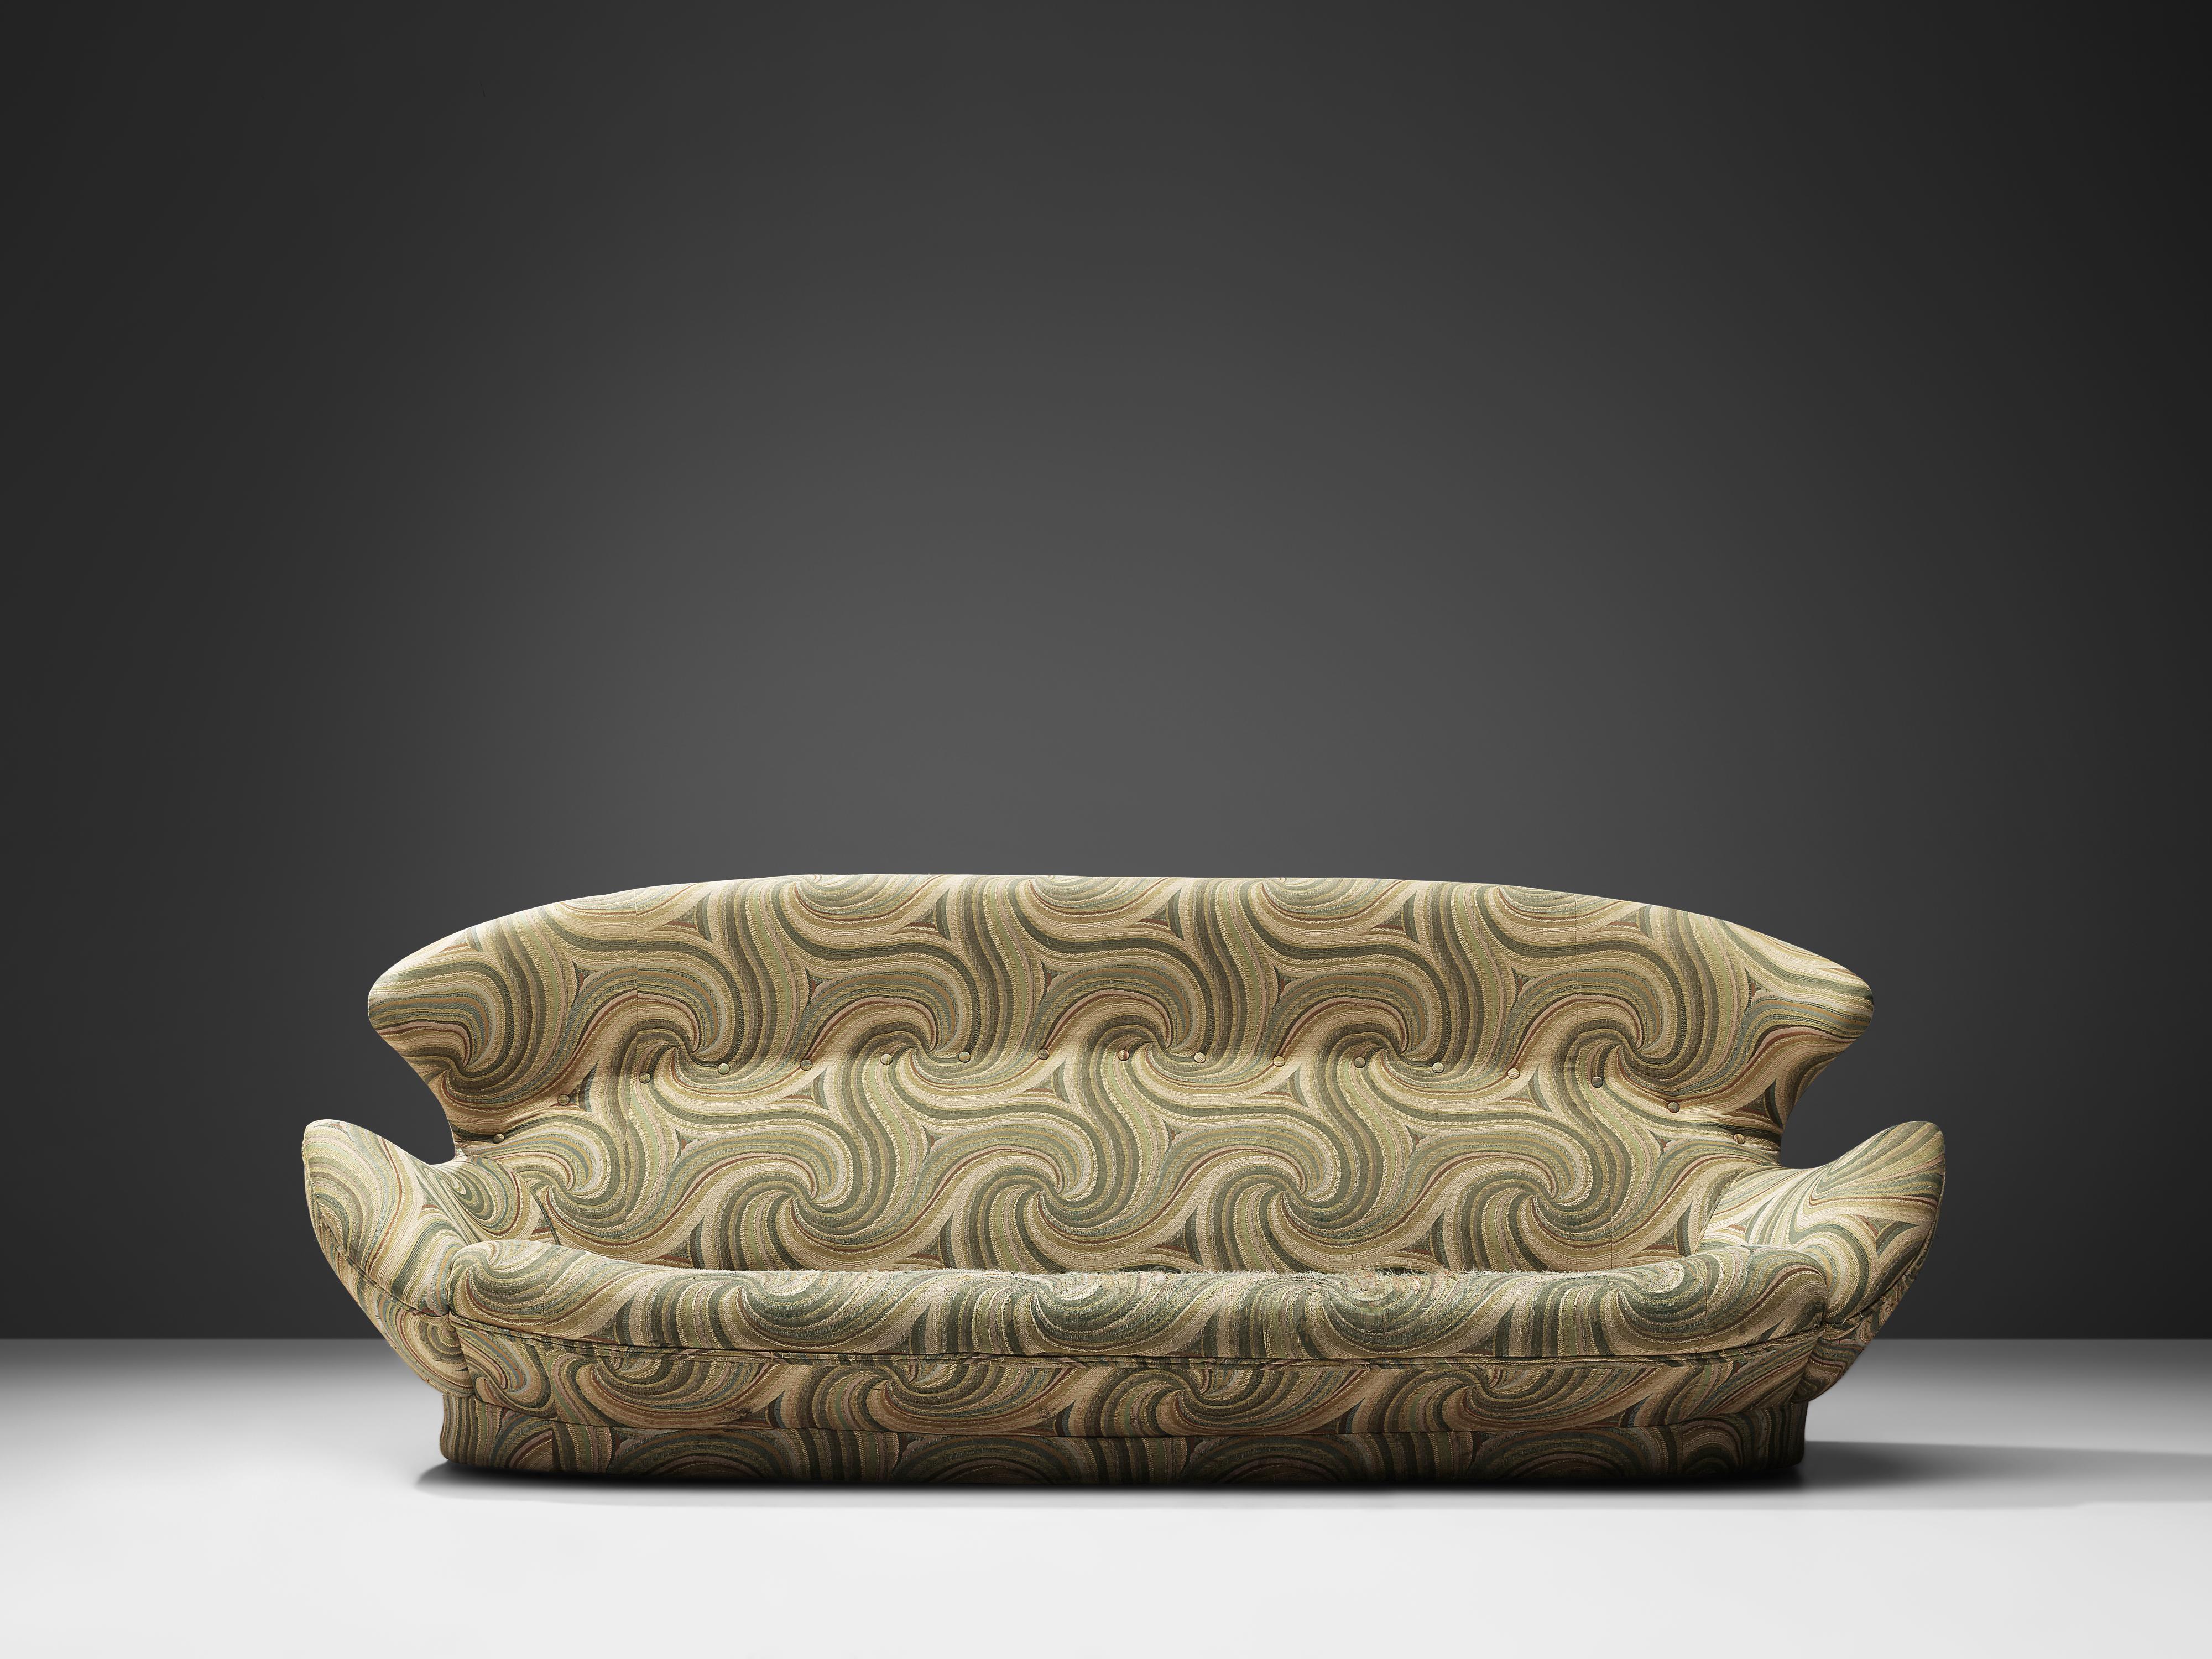 European Winged Sofa in Patterned Upholstery, 1970s